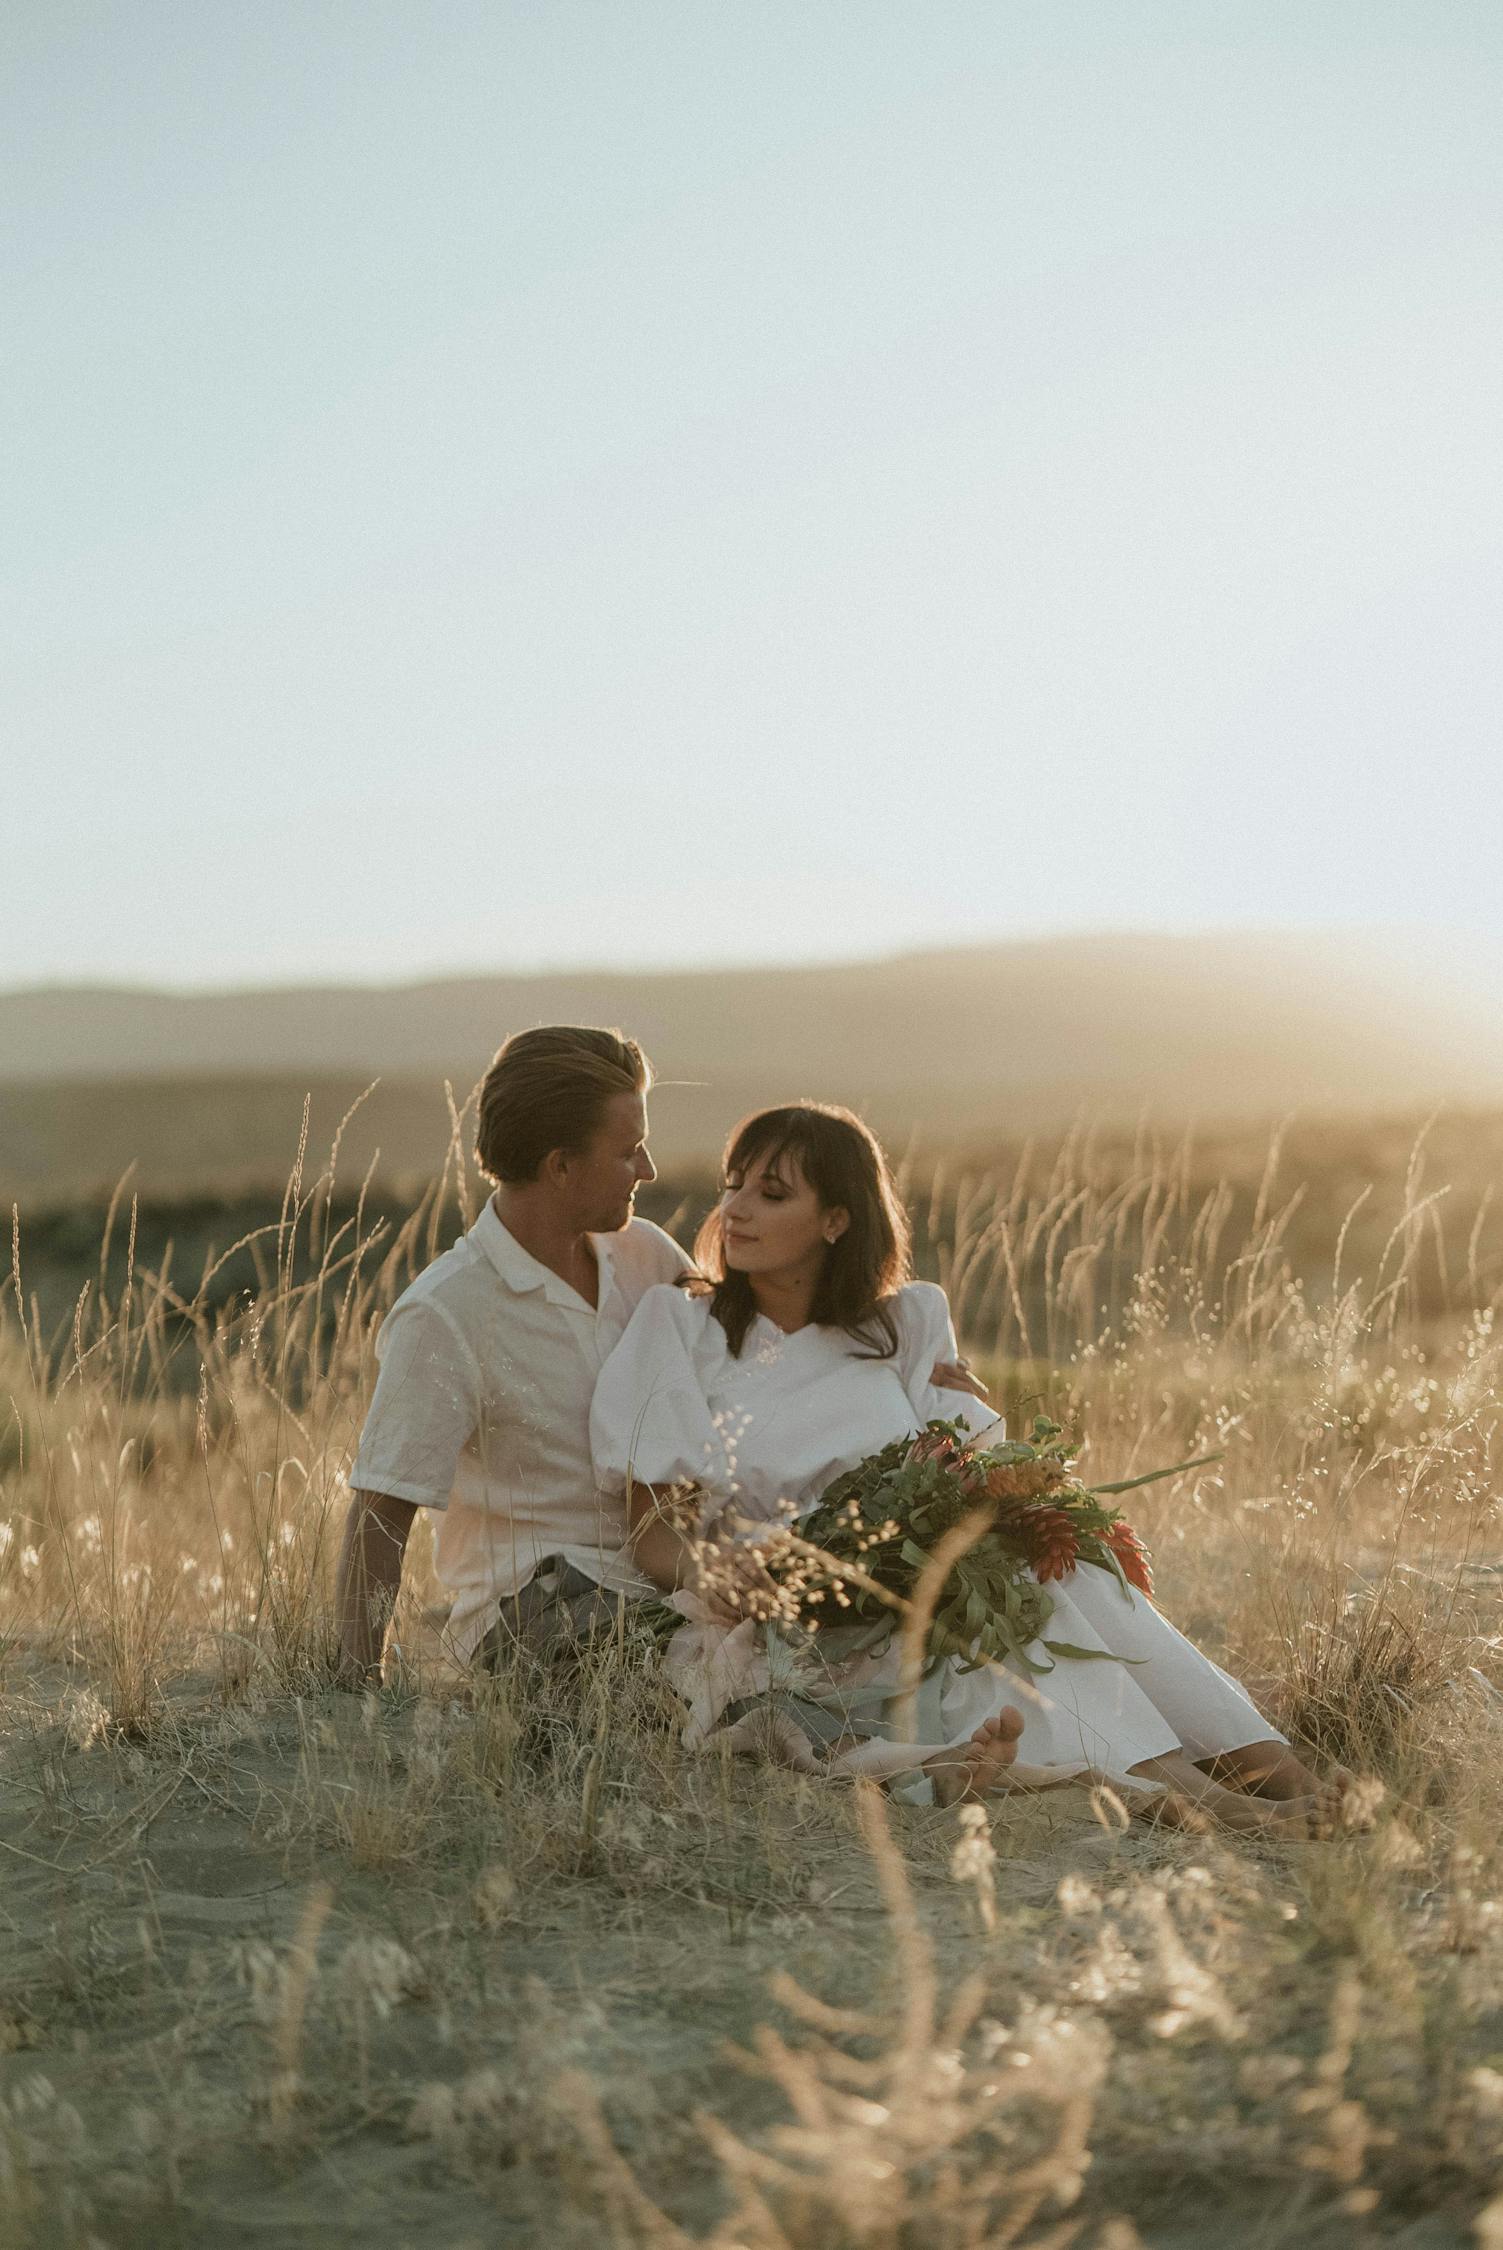 Couple embracing gently in countryside in grassy field · Free Stock Photo